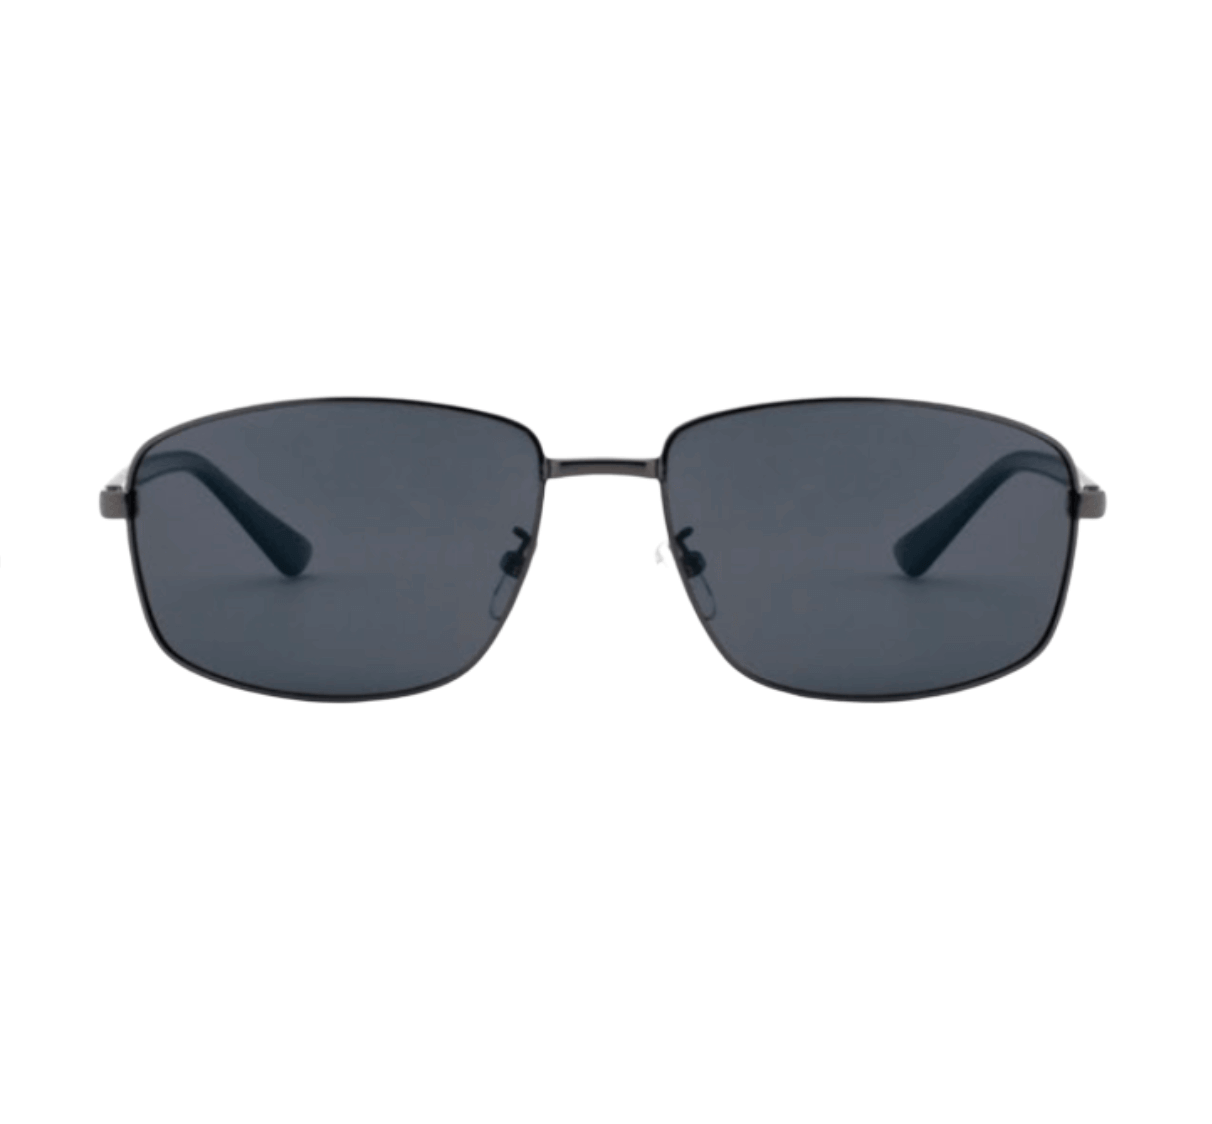 Chinese Sunglasses Manufacturers - Sunglasses Factory in China_Classic Sunglasses Mens